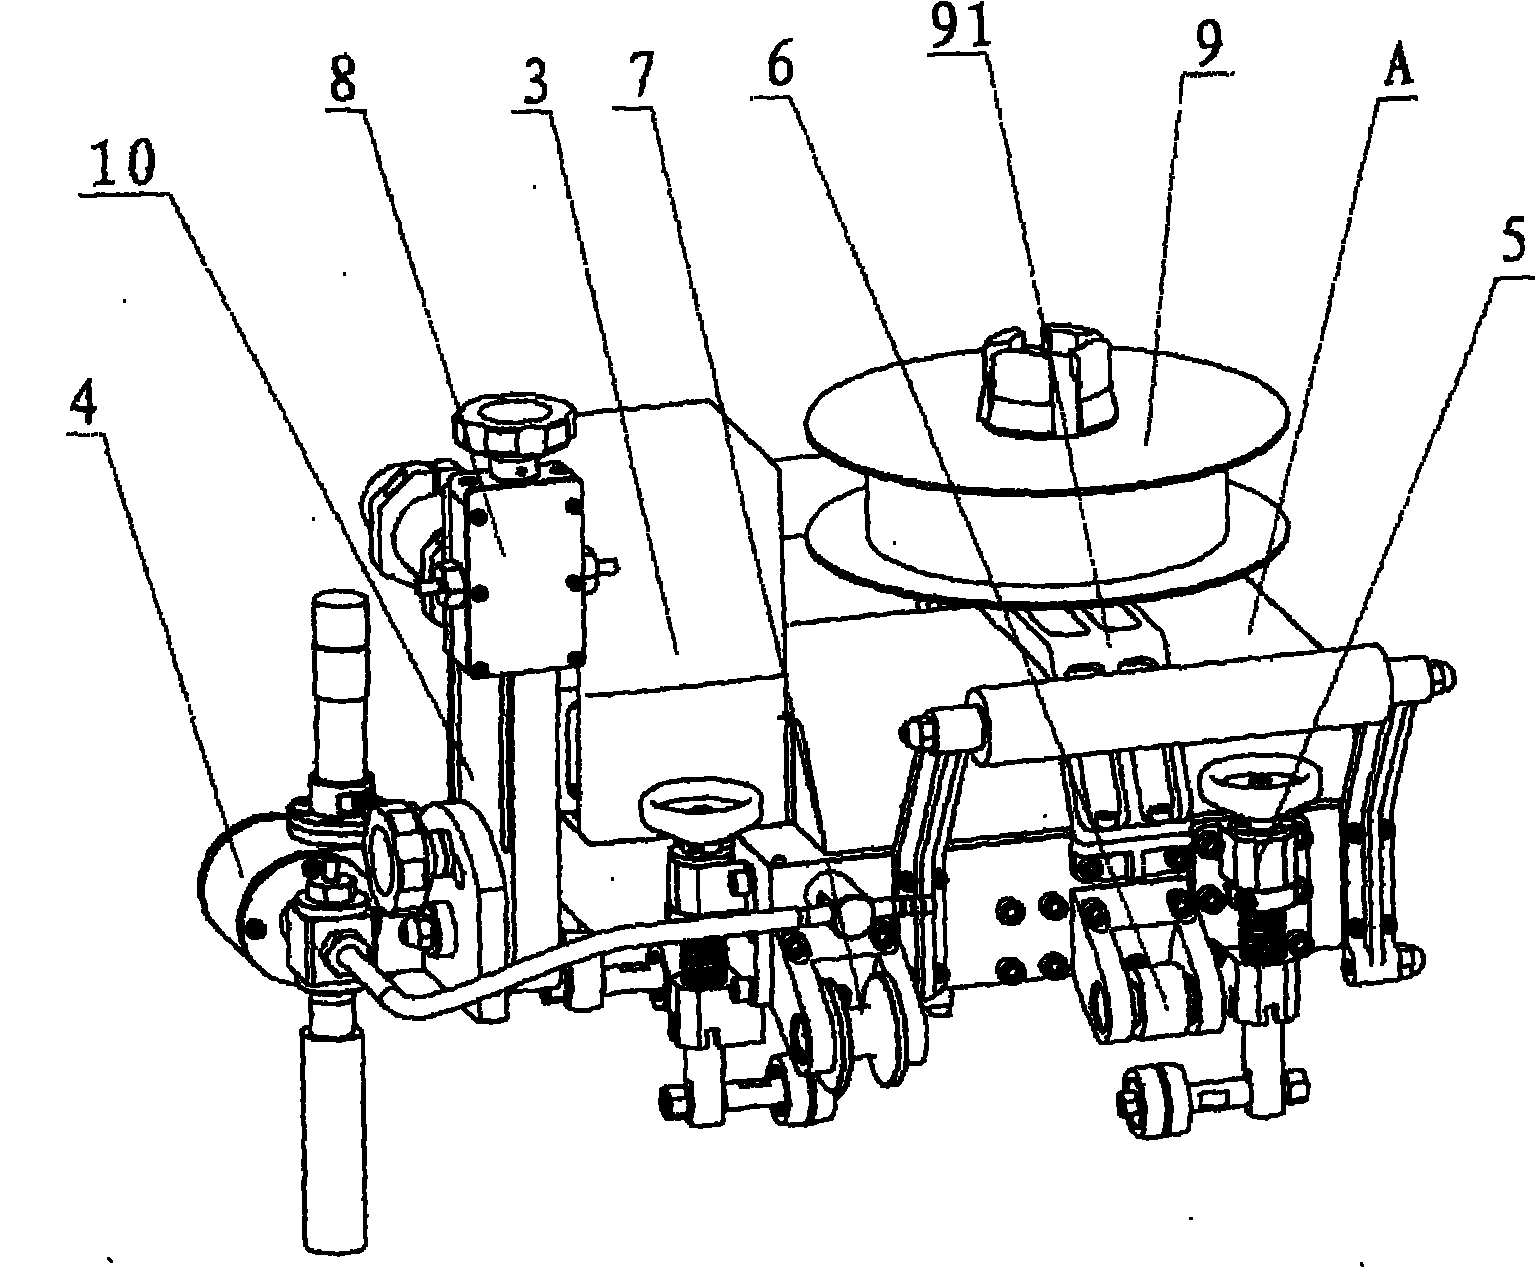 Welding tractor with steel structure being subjected to gas shielded welding